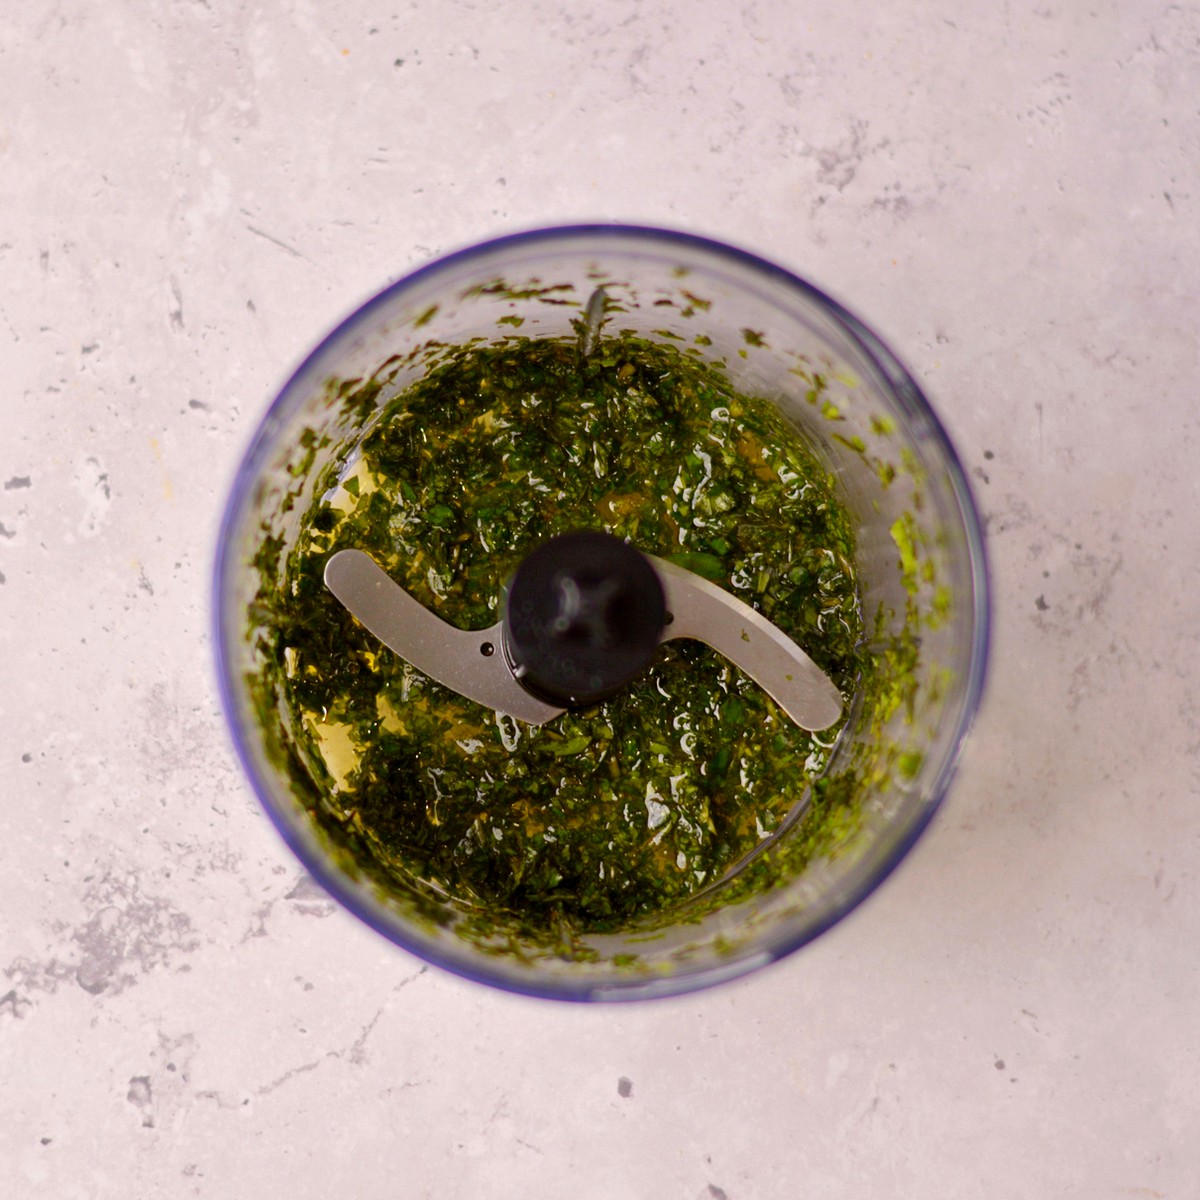 Basil and oil blended in a food processor.